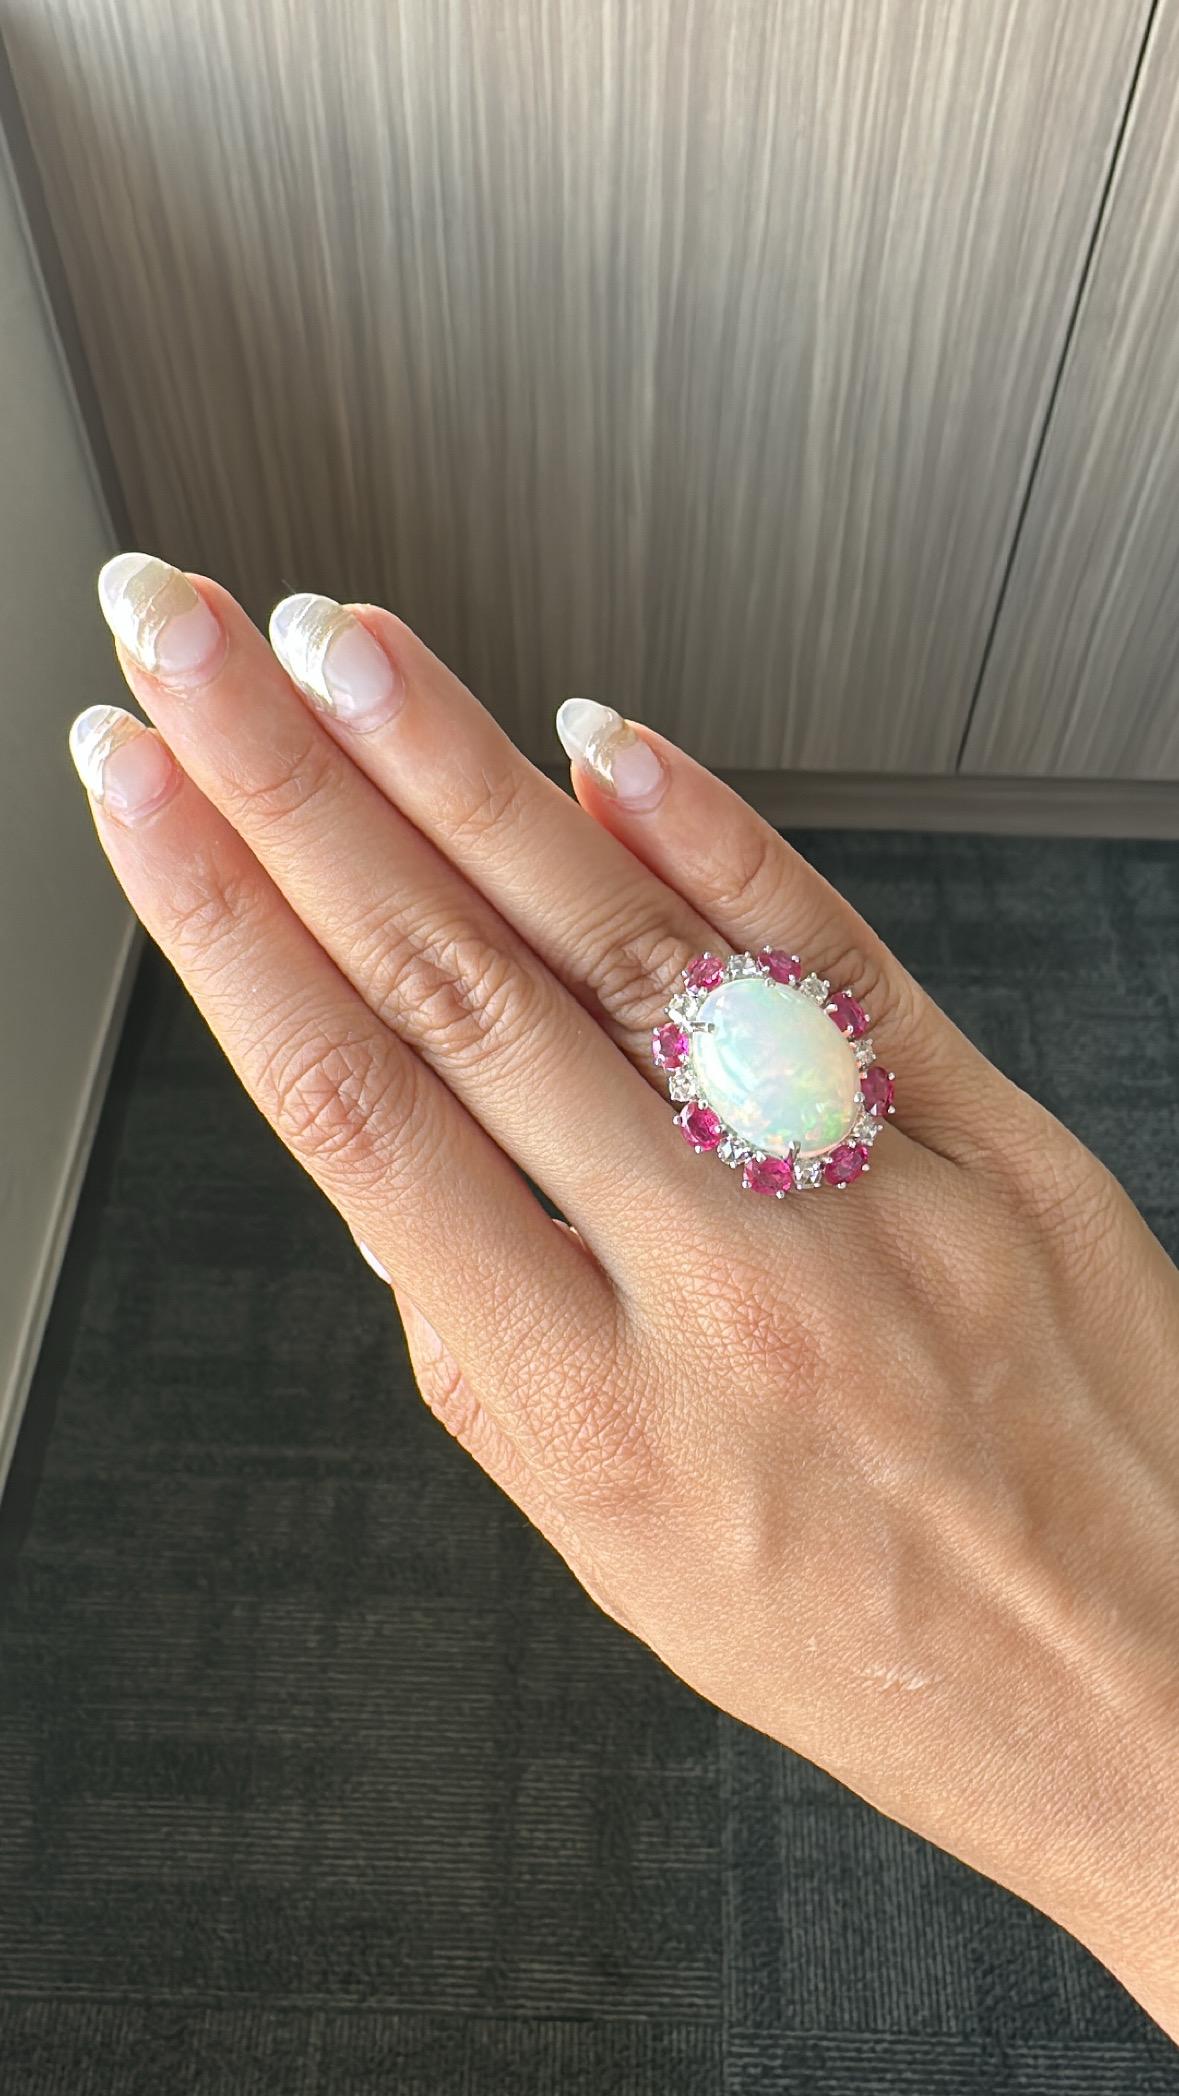 A very gorgeous and one a kind, Opal & Ruby Cocktail Ring set in 18K White Gold & Diamonds. The weight of the Opal is 11.57 carats. The Opal is of Ethiopian origin. The weight of the Rubies is 11.57 carats. The combined Diamonds weight is 0.70